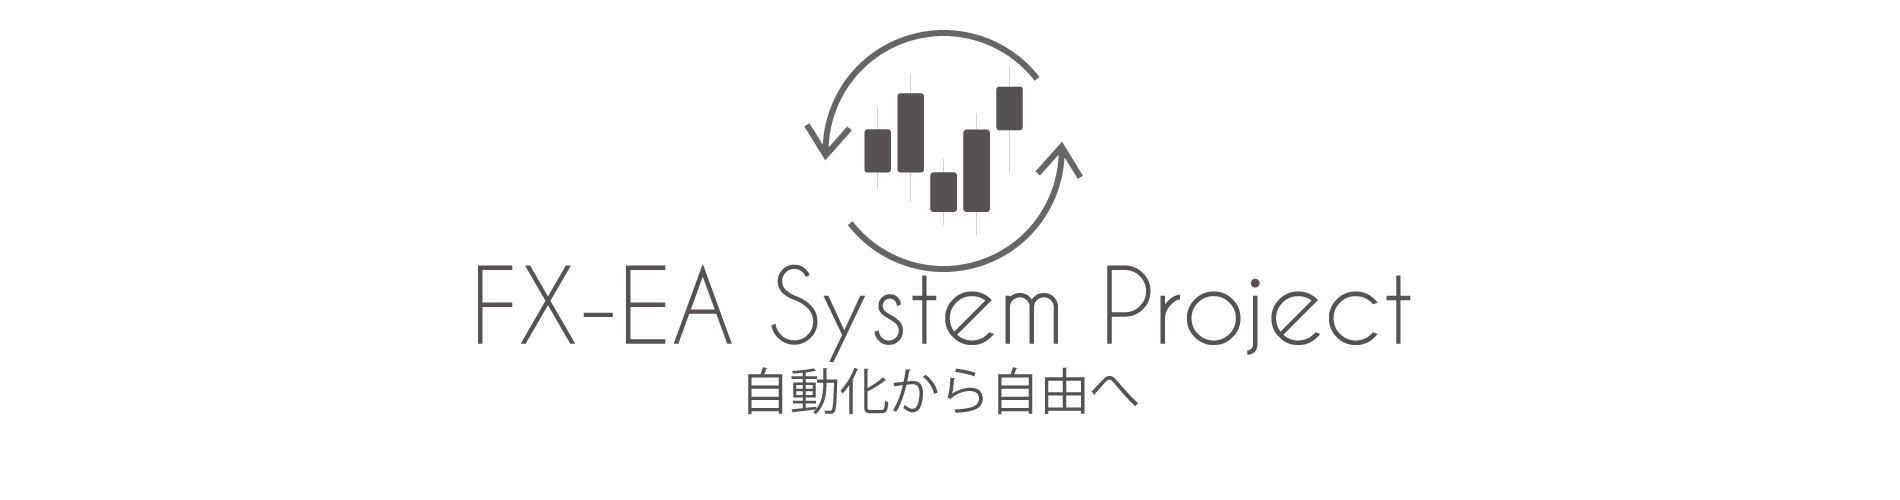 fx-ea-system-project